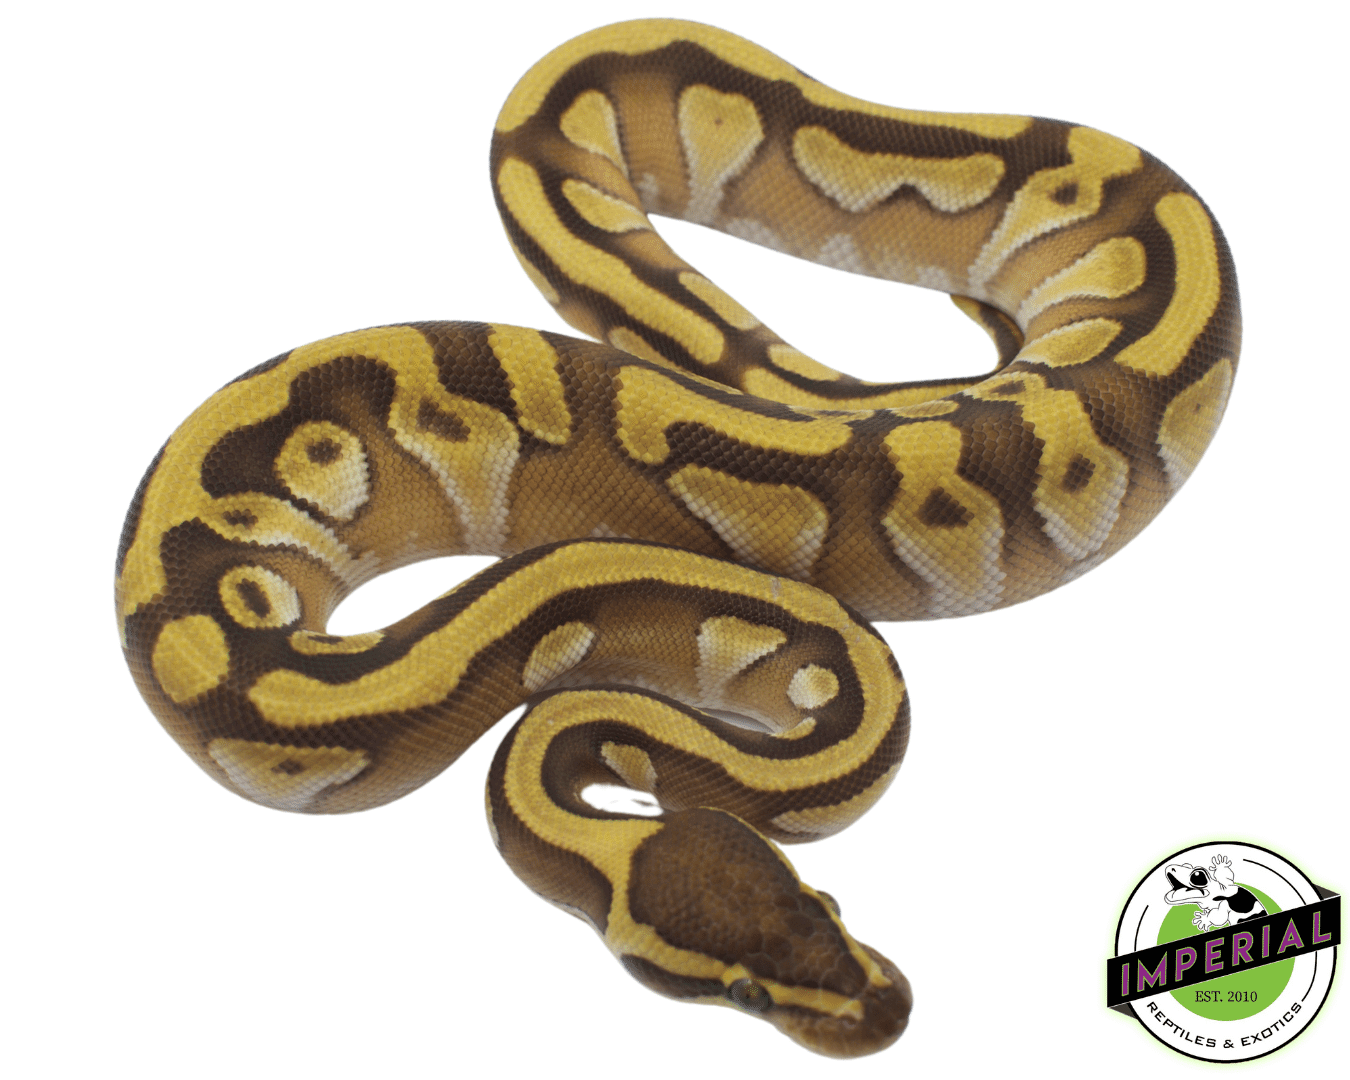 butter enchi ball python for sale, buy reptiles online